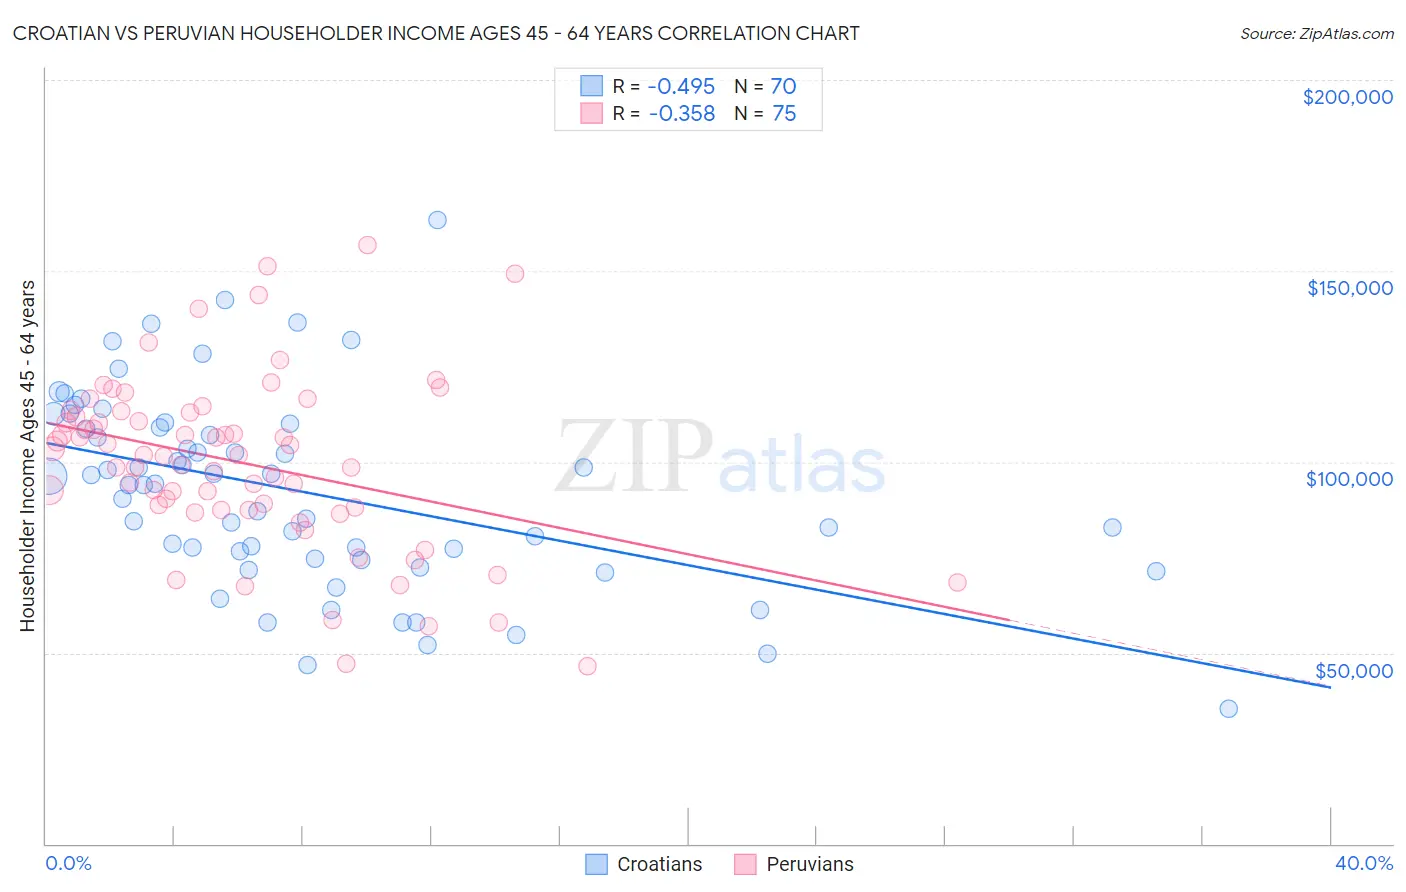 Croatian vs Peruvian Householder Income Ages 45 - 64 years